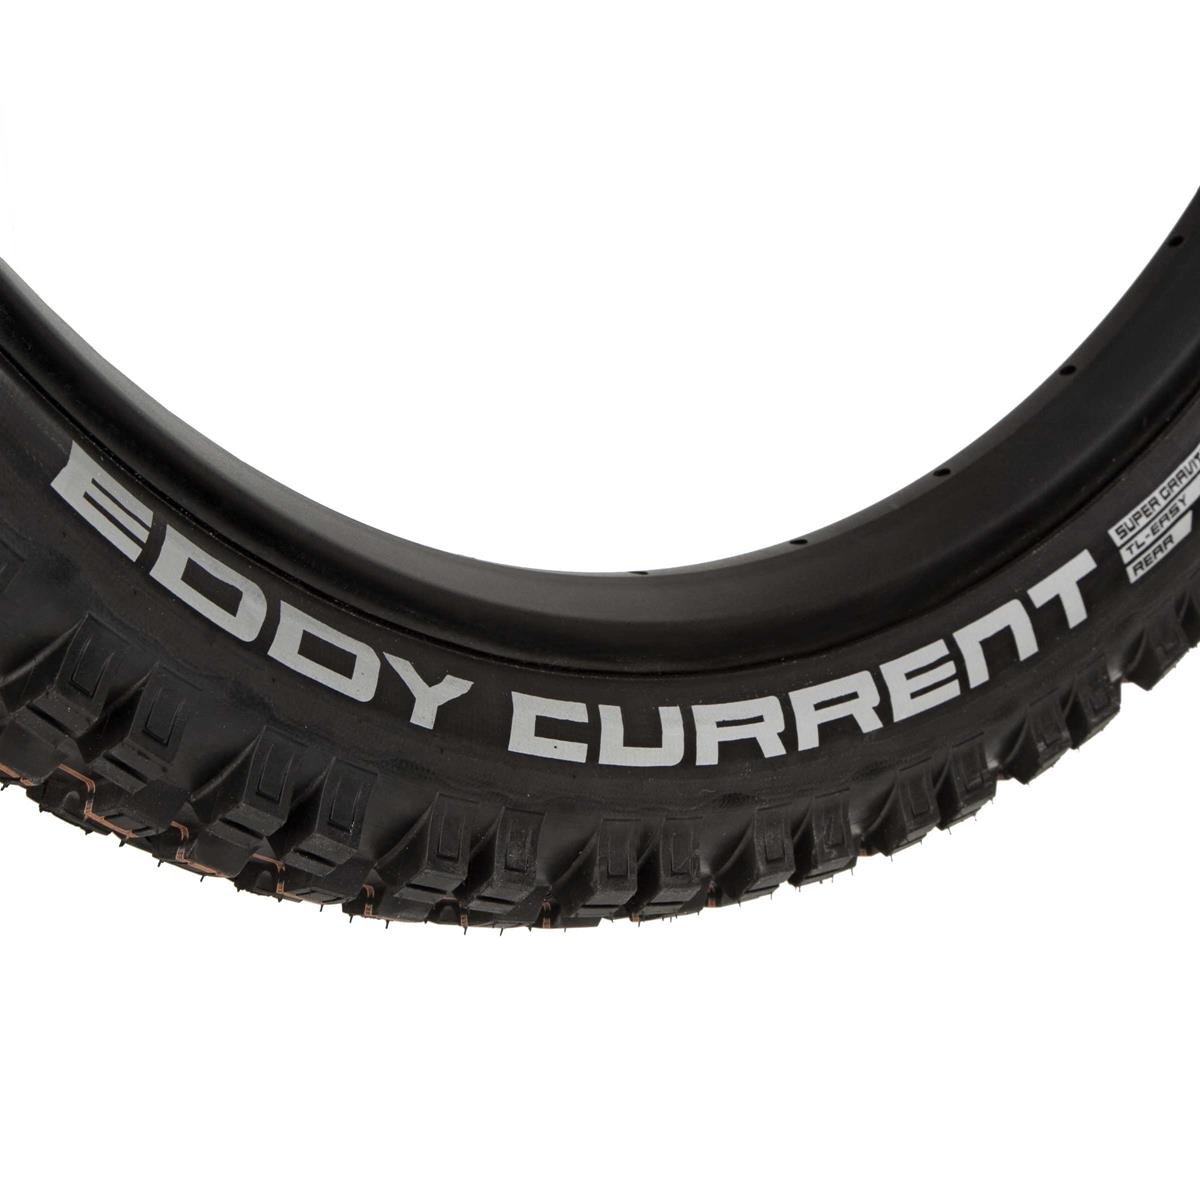 29 x 2.4 Tubeless Folding BLK Super Trail Schwalbe Eddy Current Front Tire 